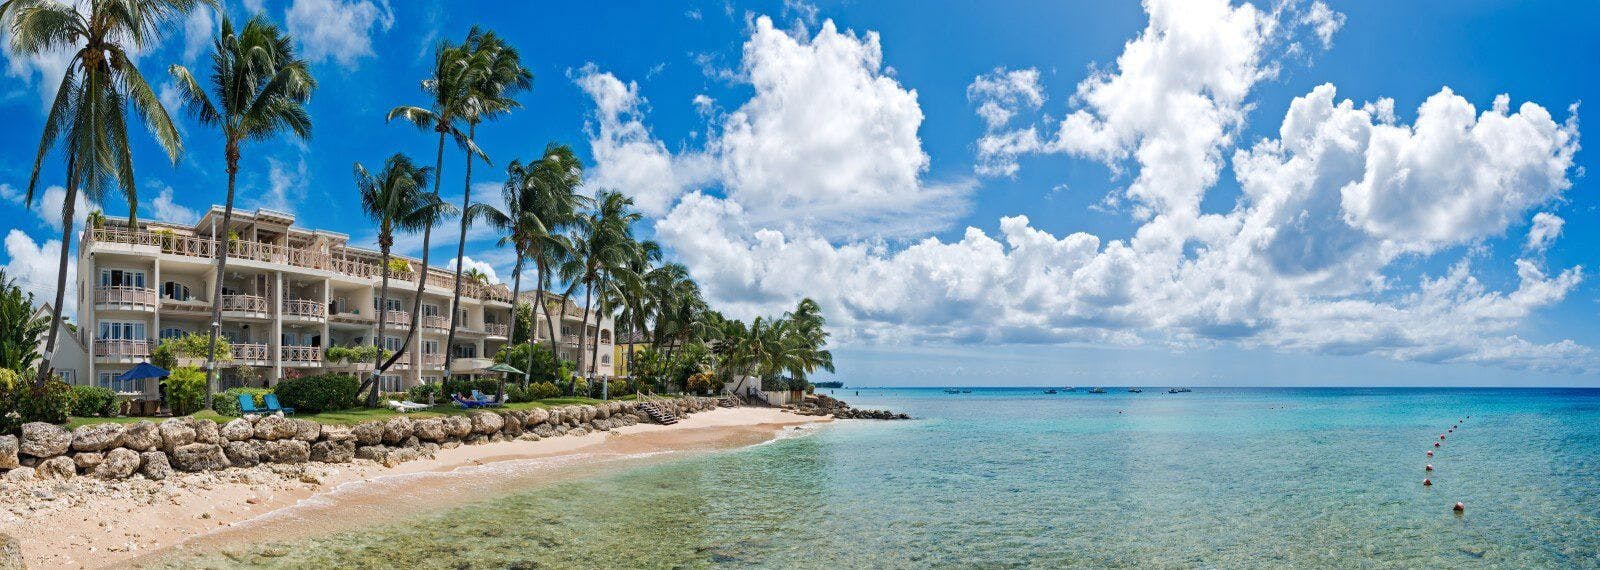 Reeds Bay white sand beach in Barbados with apartments on the sea front